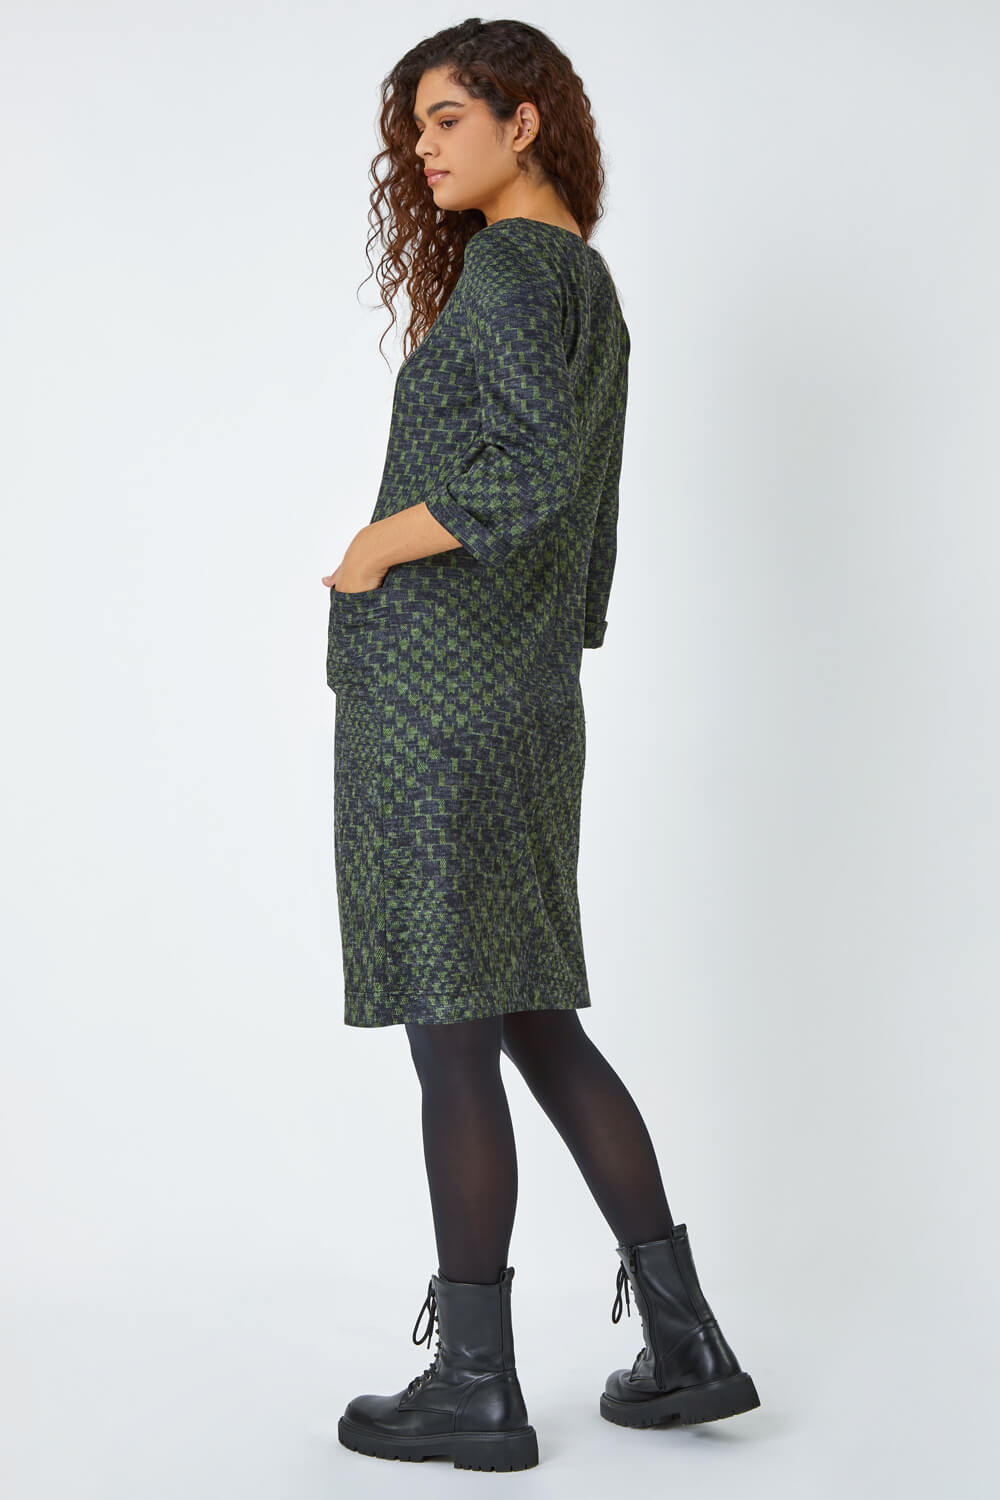 Green Abstract Check Print Shift Stretch Dress, Image 3 of 5